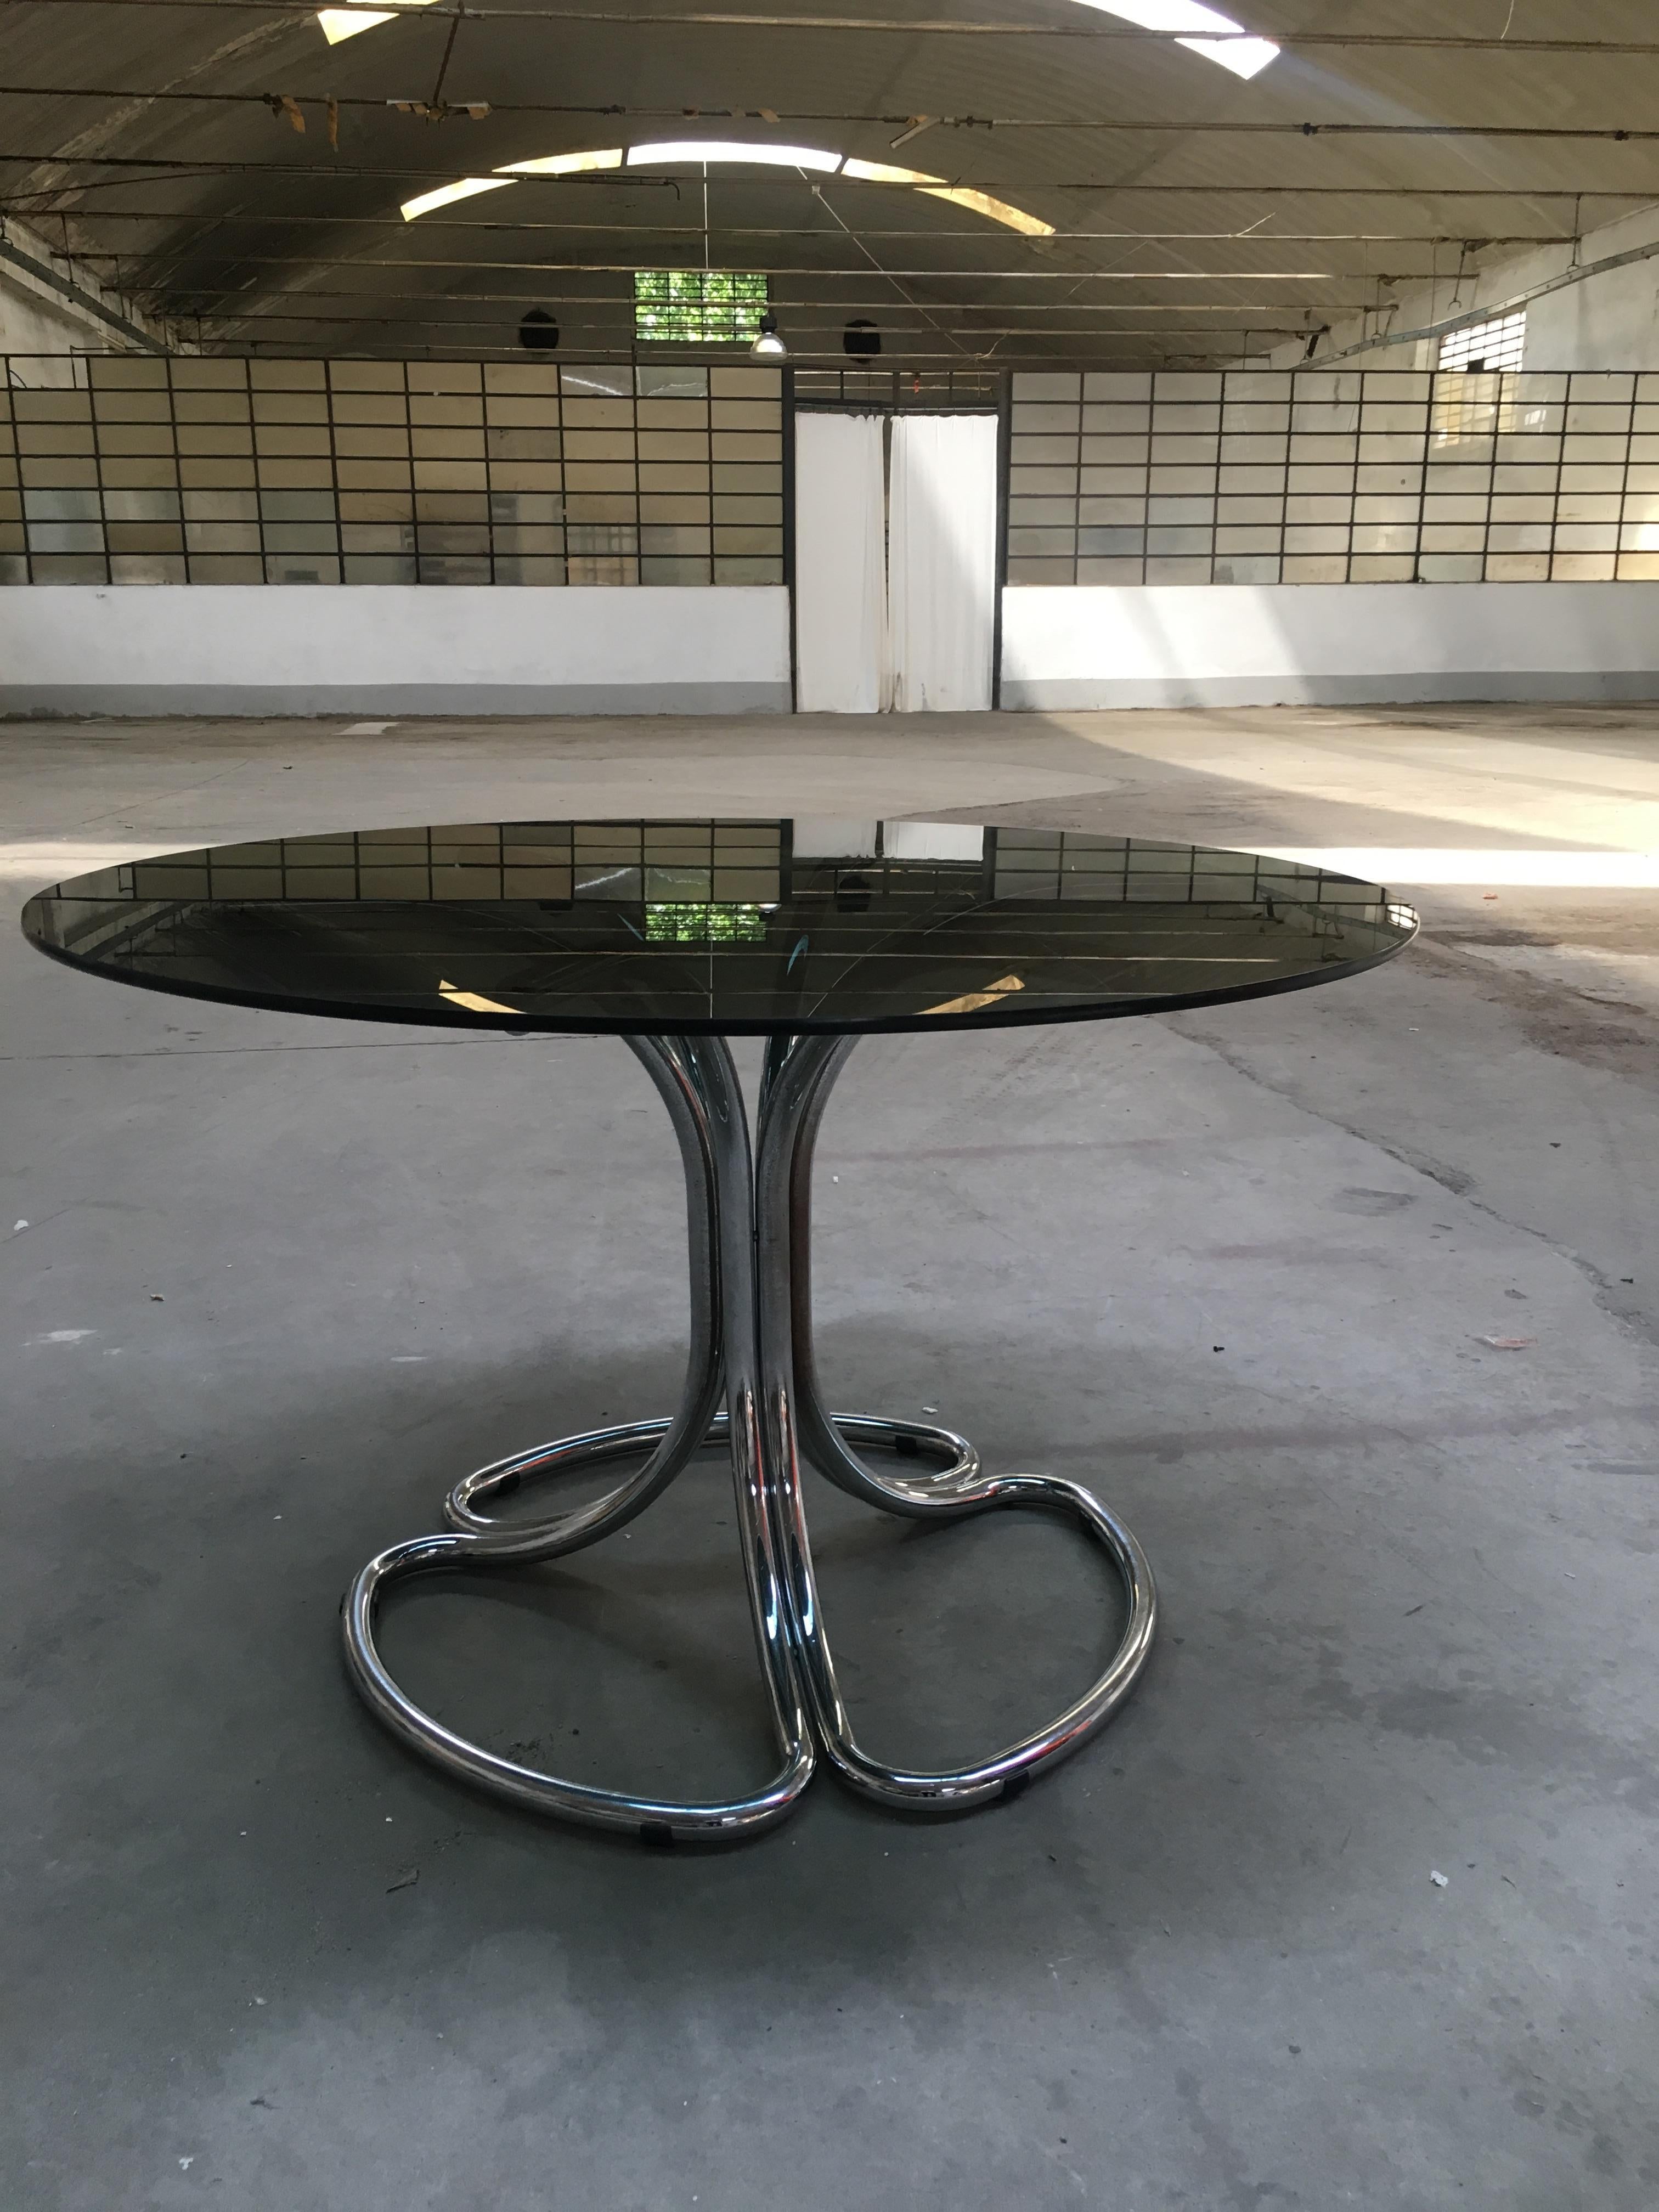 Late 20th Century Italian Chrome Base Smoked Glass Top Dining Table by Giotto Stoppino from 1970s